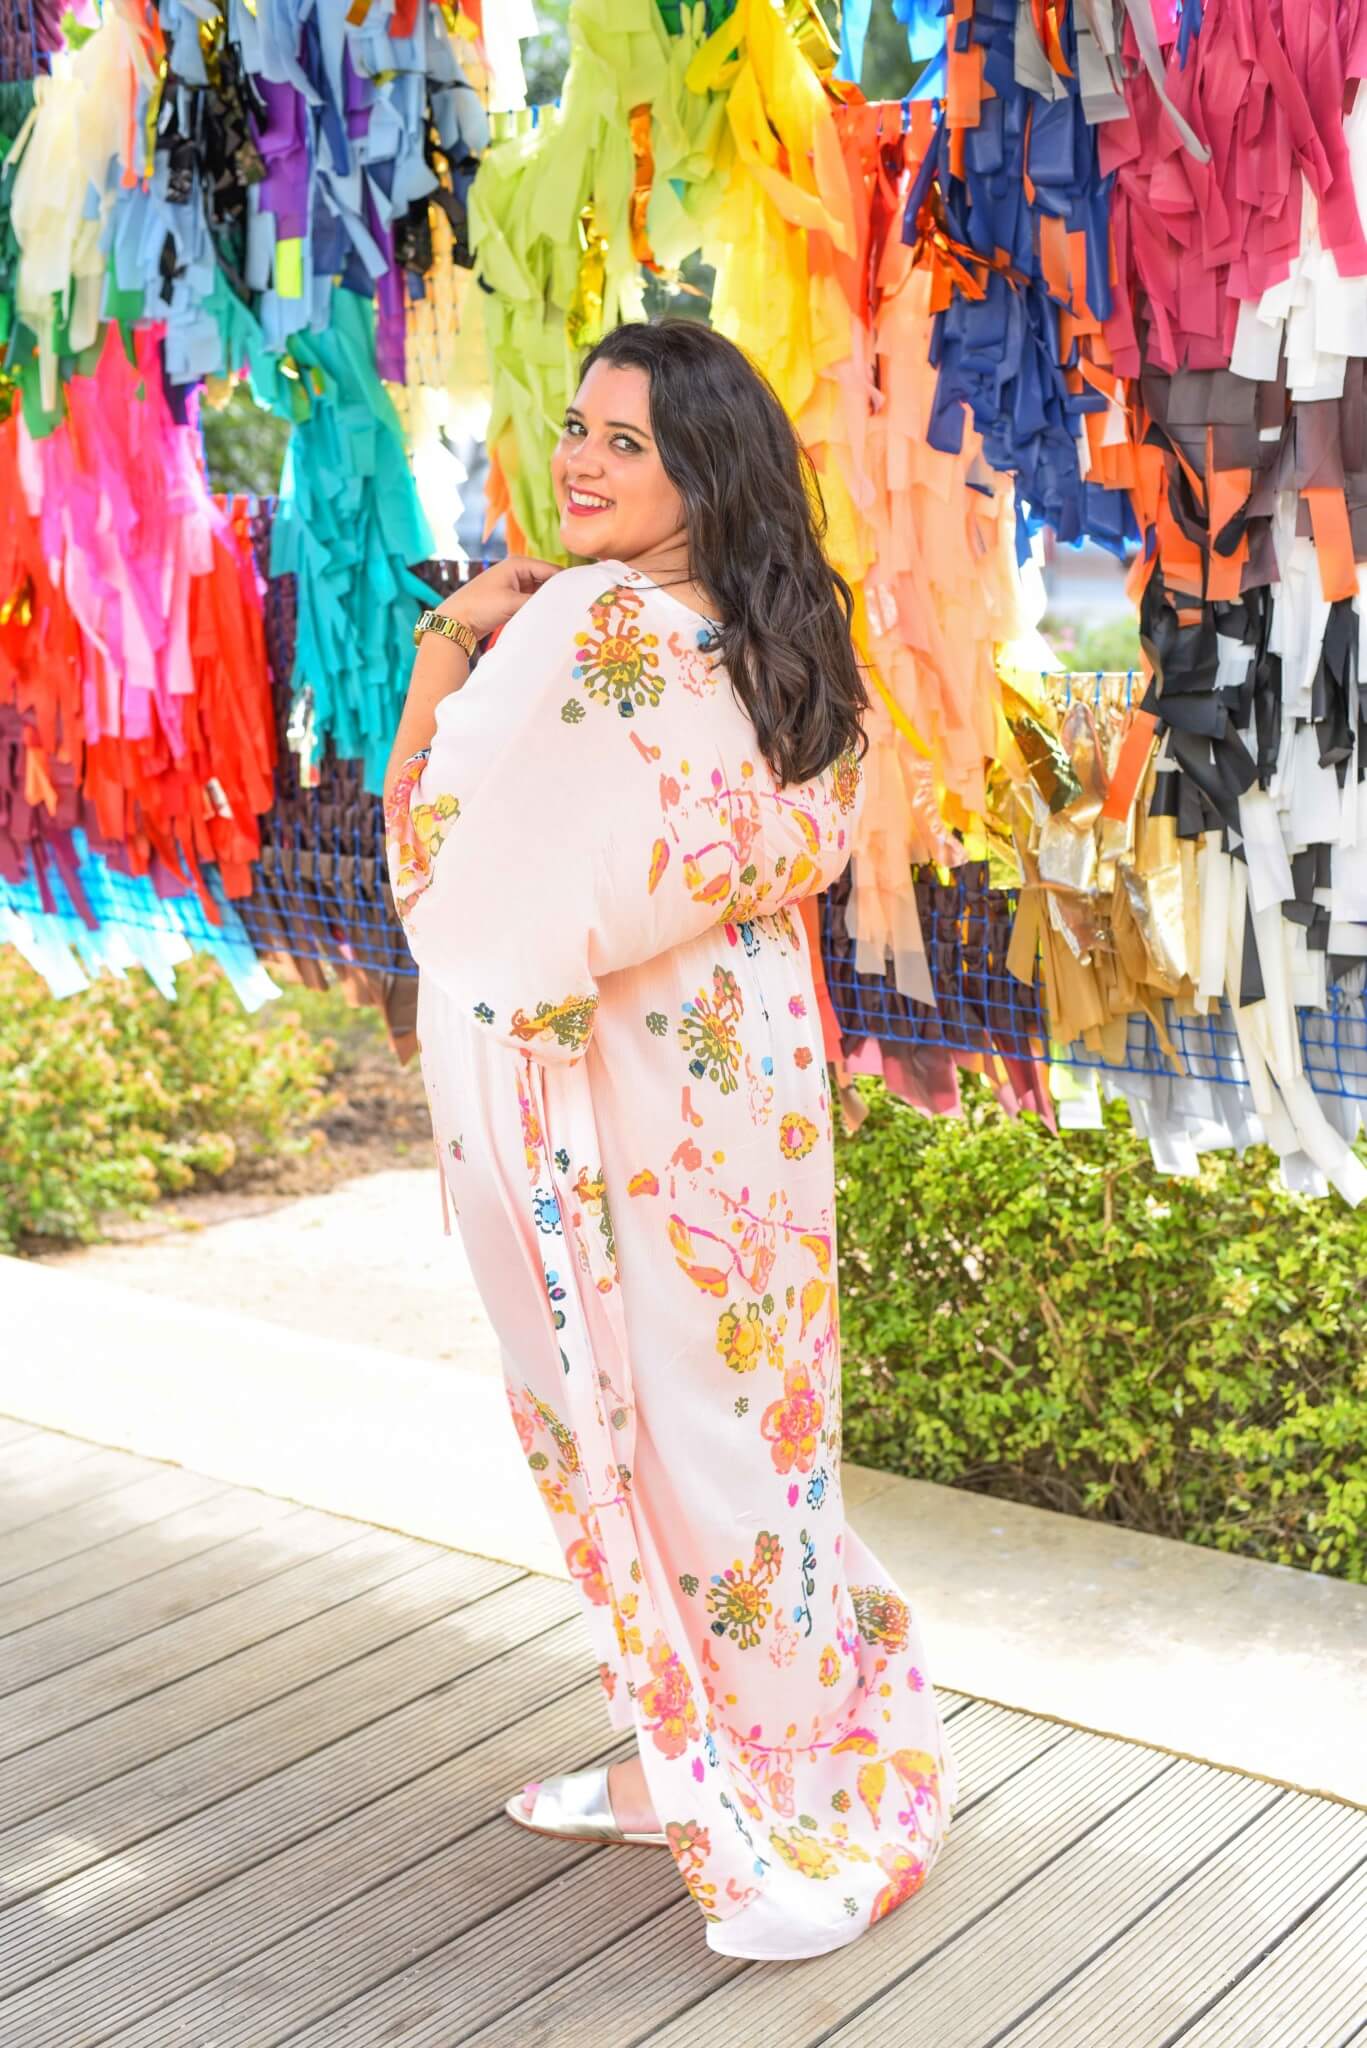 A fun, flirty maxi dress is perfect for a day time date (or day spent with friends) exploring new art installations. This plus size maxi dress from Melissa McCarthy Seven7 can be worn casually or glammed up for an evening out. #plussizefashion #bohemianfashion #curvystyle - Gwynnie Bee outfit by popular Houston fashion blogger Something Gold, Something Blue